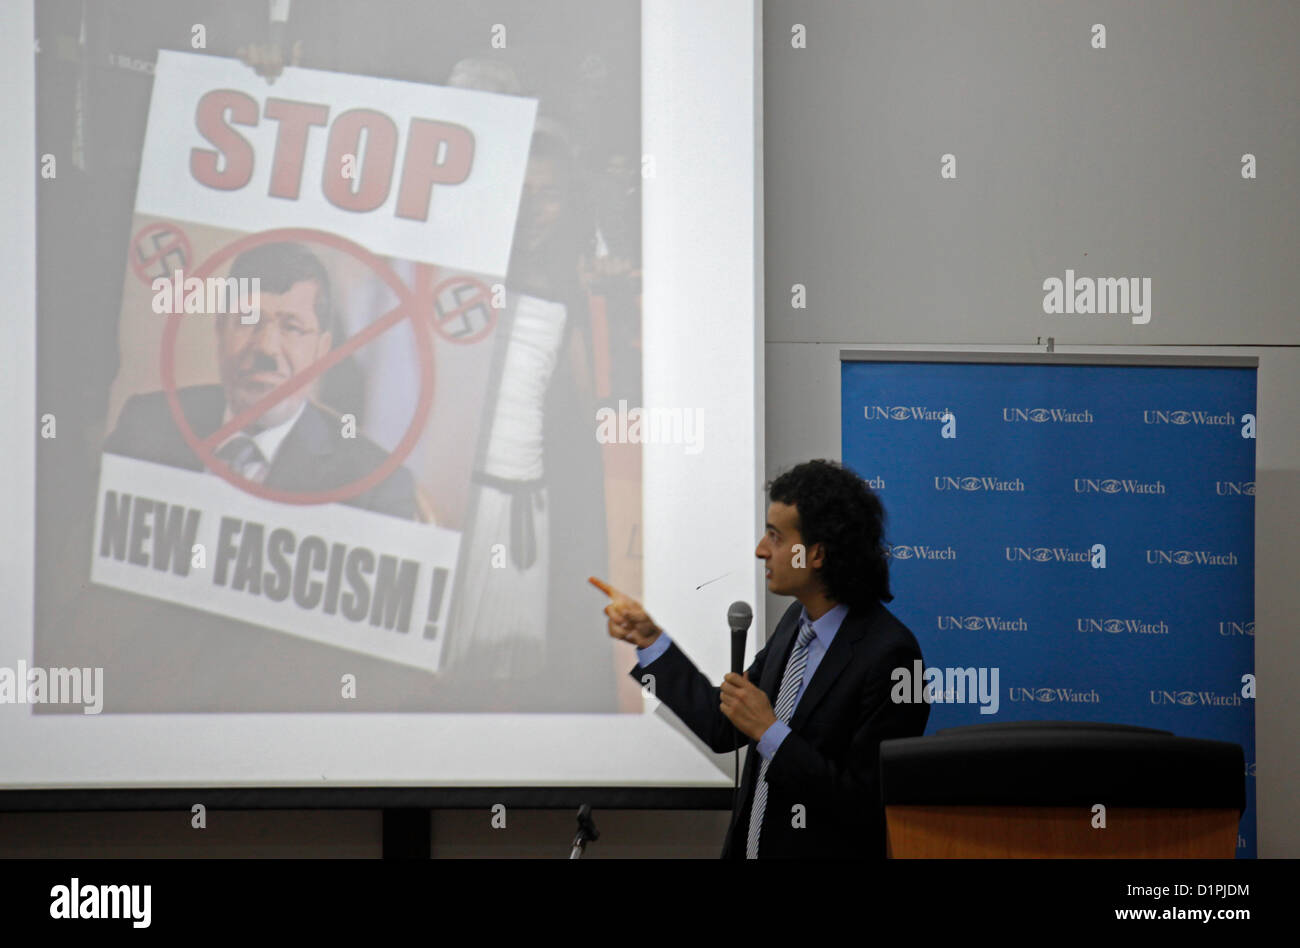 Maikel Nabil Sanad, an Egyptian blogger and political activist points at an image screened depicting Egyptian PM Mohamed Morsi with writing 'Stop, New Fascism' during a speech in Tel Aviv University on 02 January 2012. Maikel became famous in 2010 for refusing to serve in the Egyptian army, then in 2011 for his role in the Egyptian revolution. He is known for promoting liberal democratic values in Egypt, and campaigning for peaceful relations between Egypt and Israel. Stock Photo